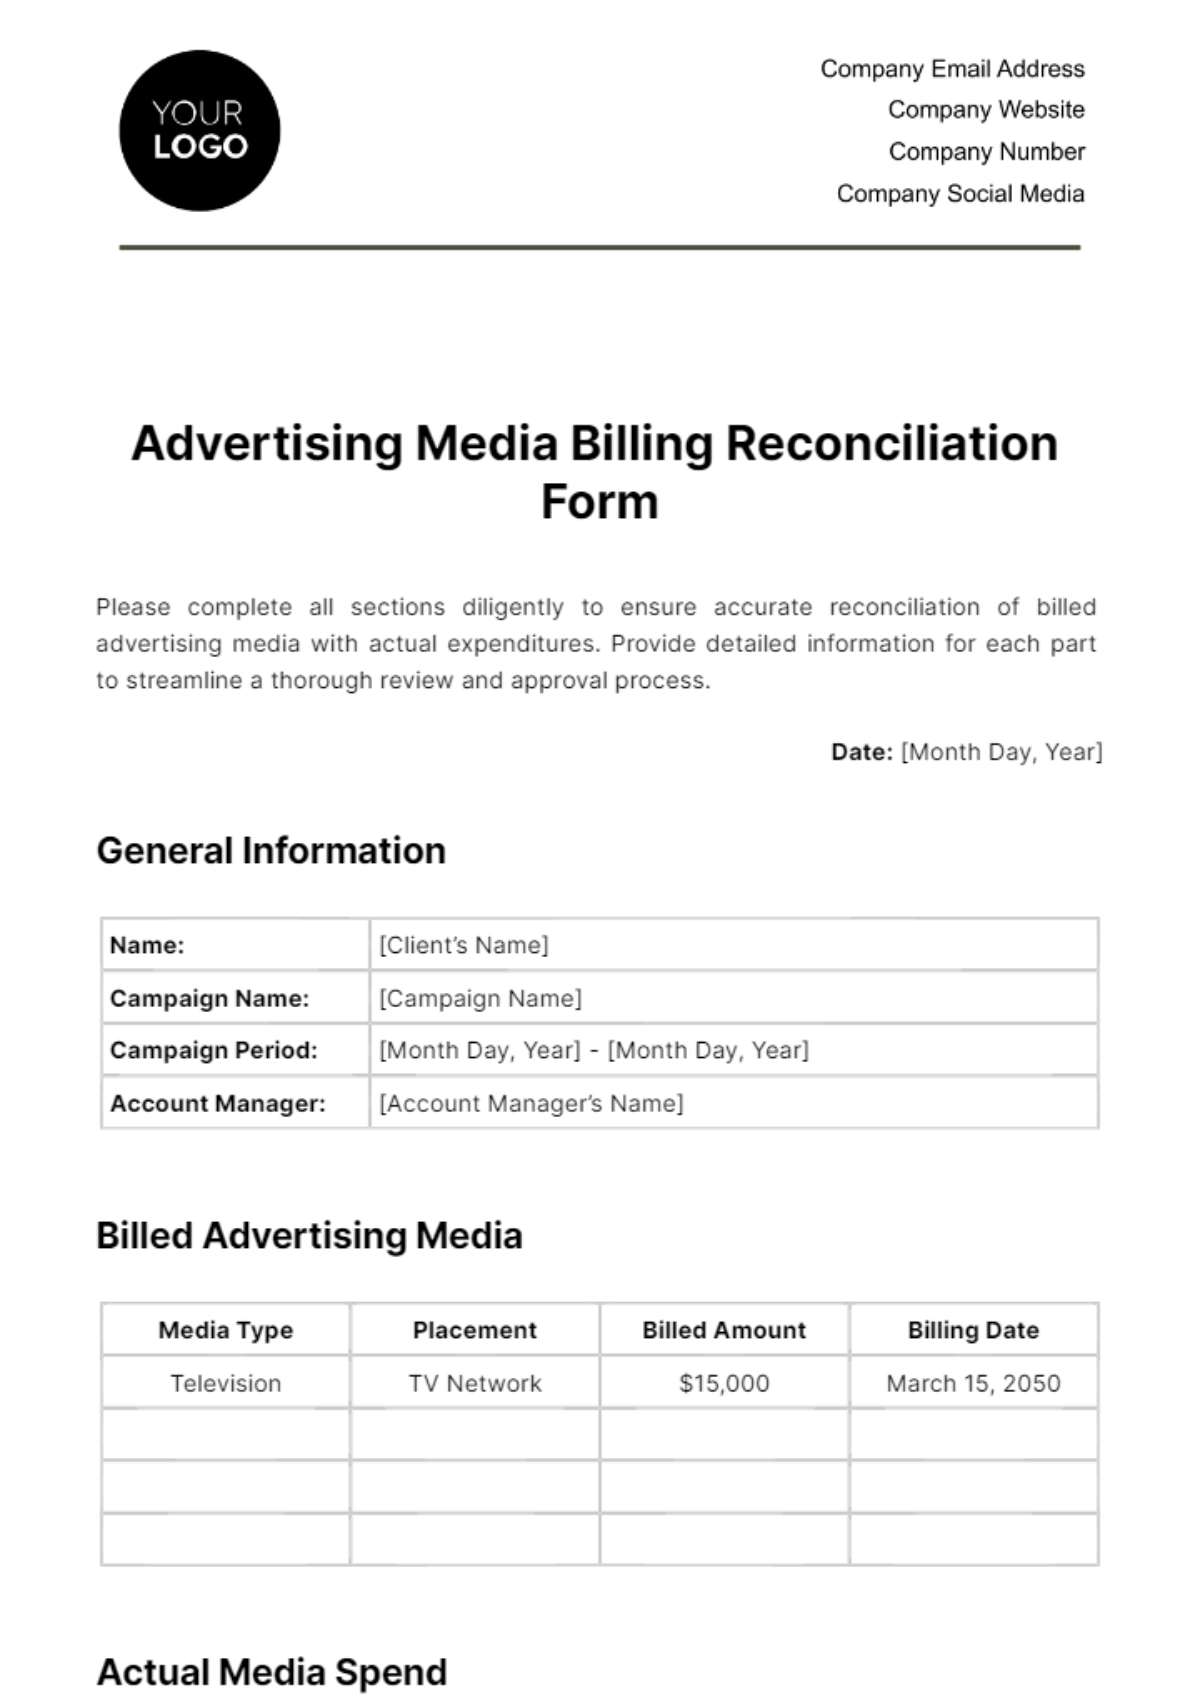 Advertising Media Billing Reconciliation Form Template